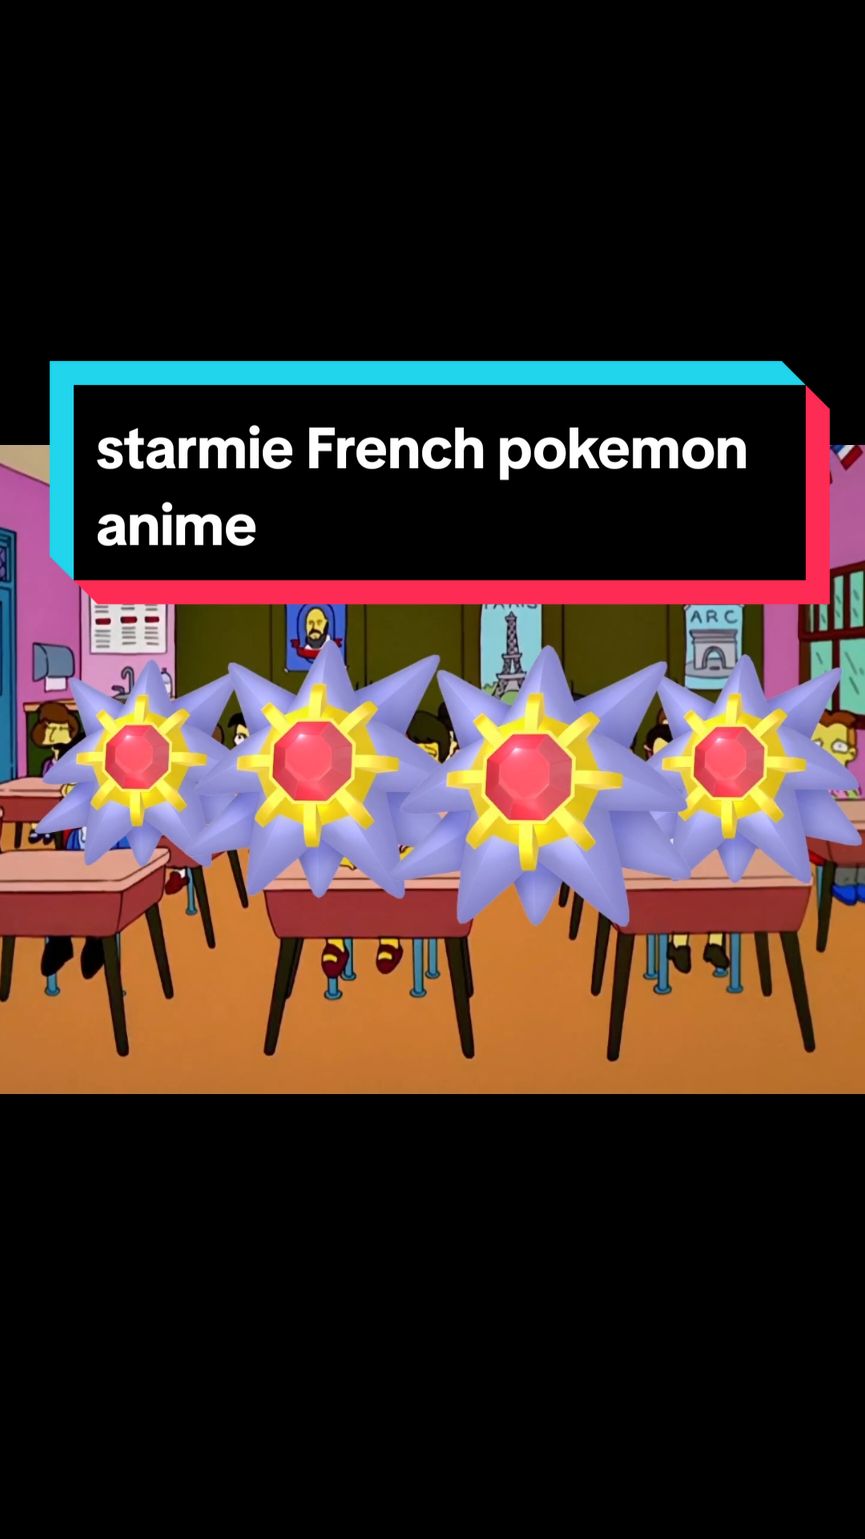 now why does Starmie sound like that in the French pokemon anime? #pokemon #gaming #anime #nintendo #starmie #pokemongo #pokemonmeme #floptok #floptok😍😍😭😌🤞💅💅 #simpsons 